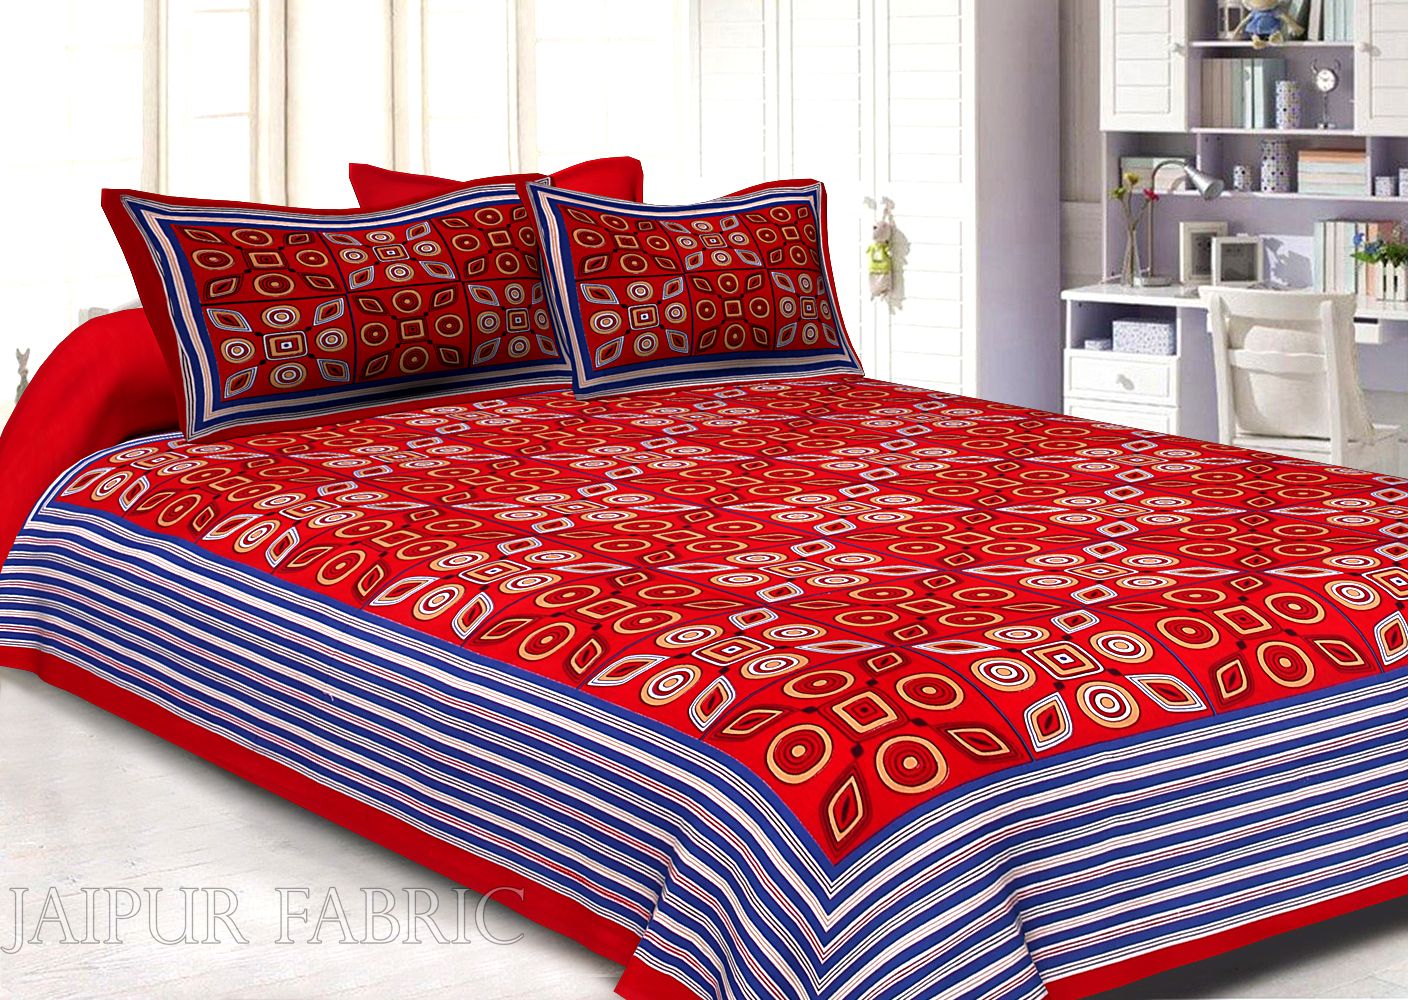 Red Geometric Printed Cotton Double Bed Sheet